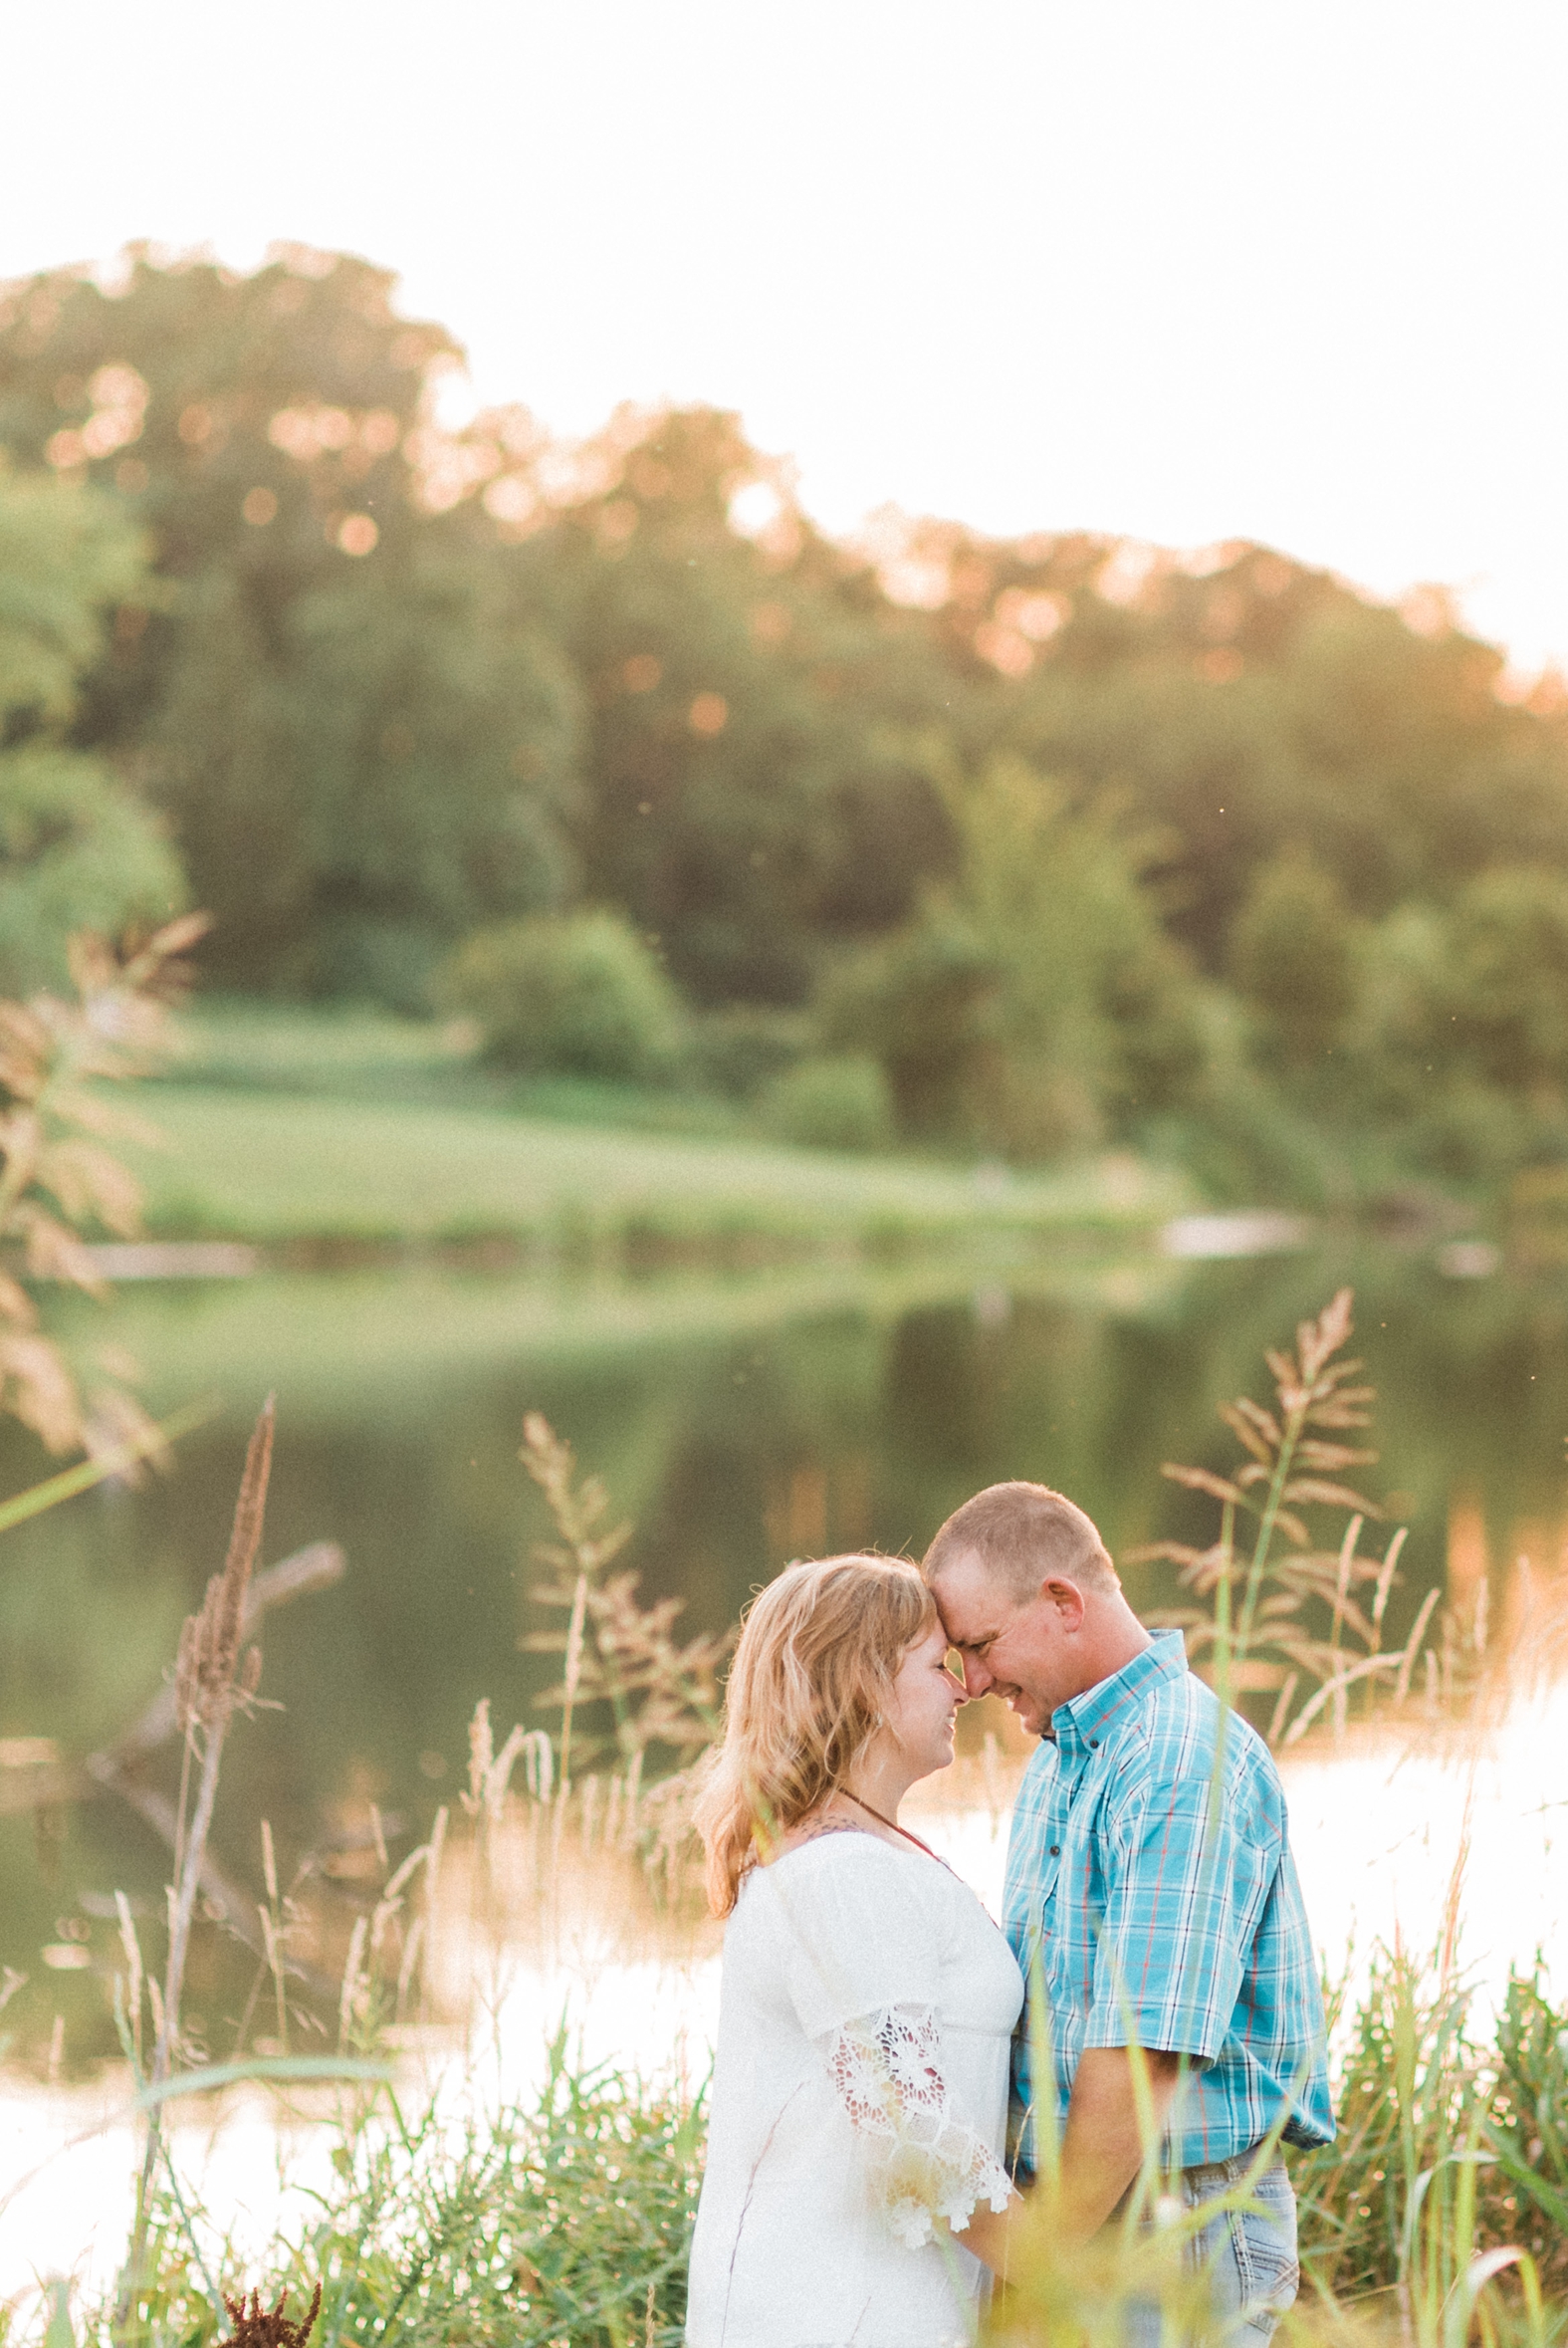 Bride and groom touch foreheads and embrace at their sunset engagement shoot in Broemmelsiek Park in St. Charles, MO.